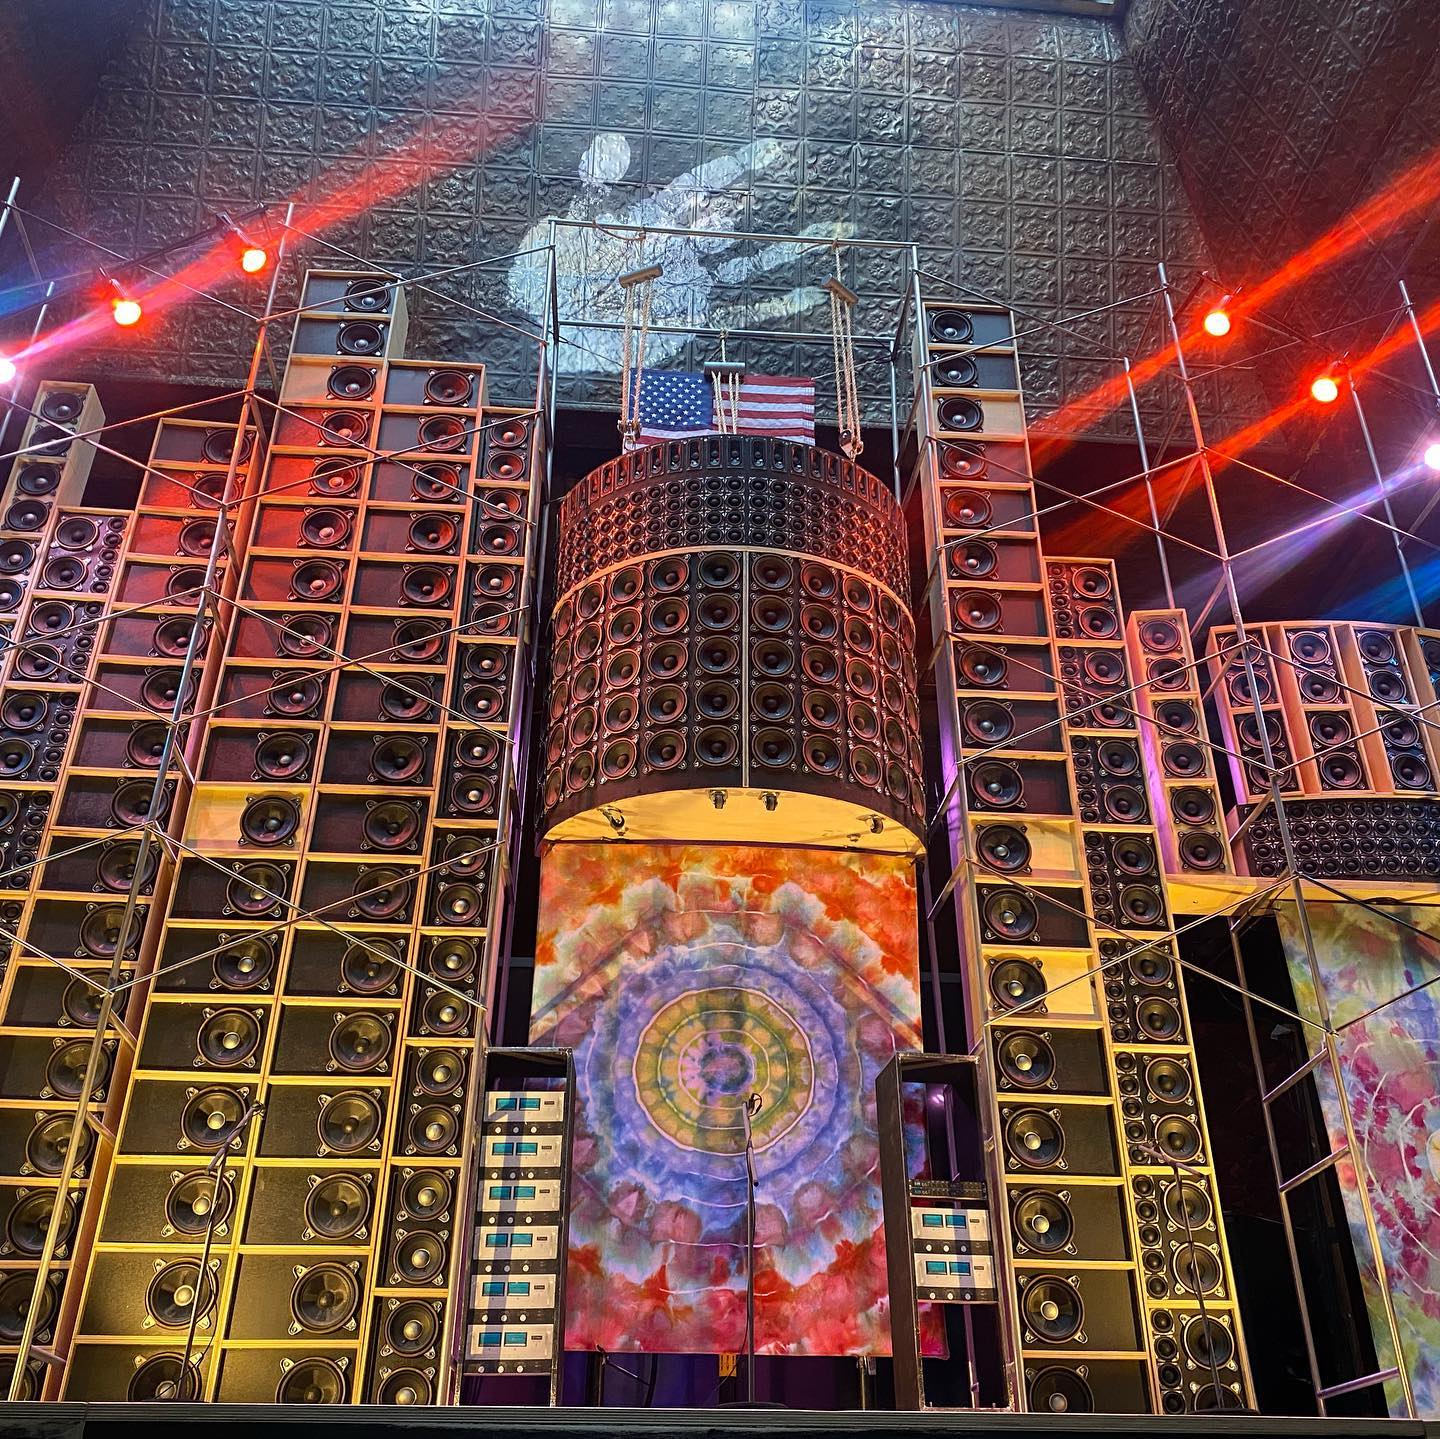 CT man building replica of the Grateful Dead’s ‘Wall of Sound’